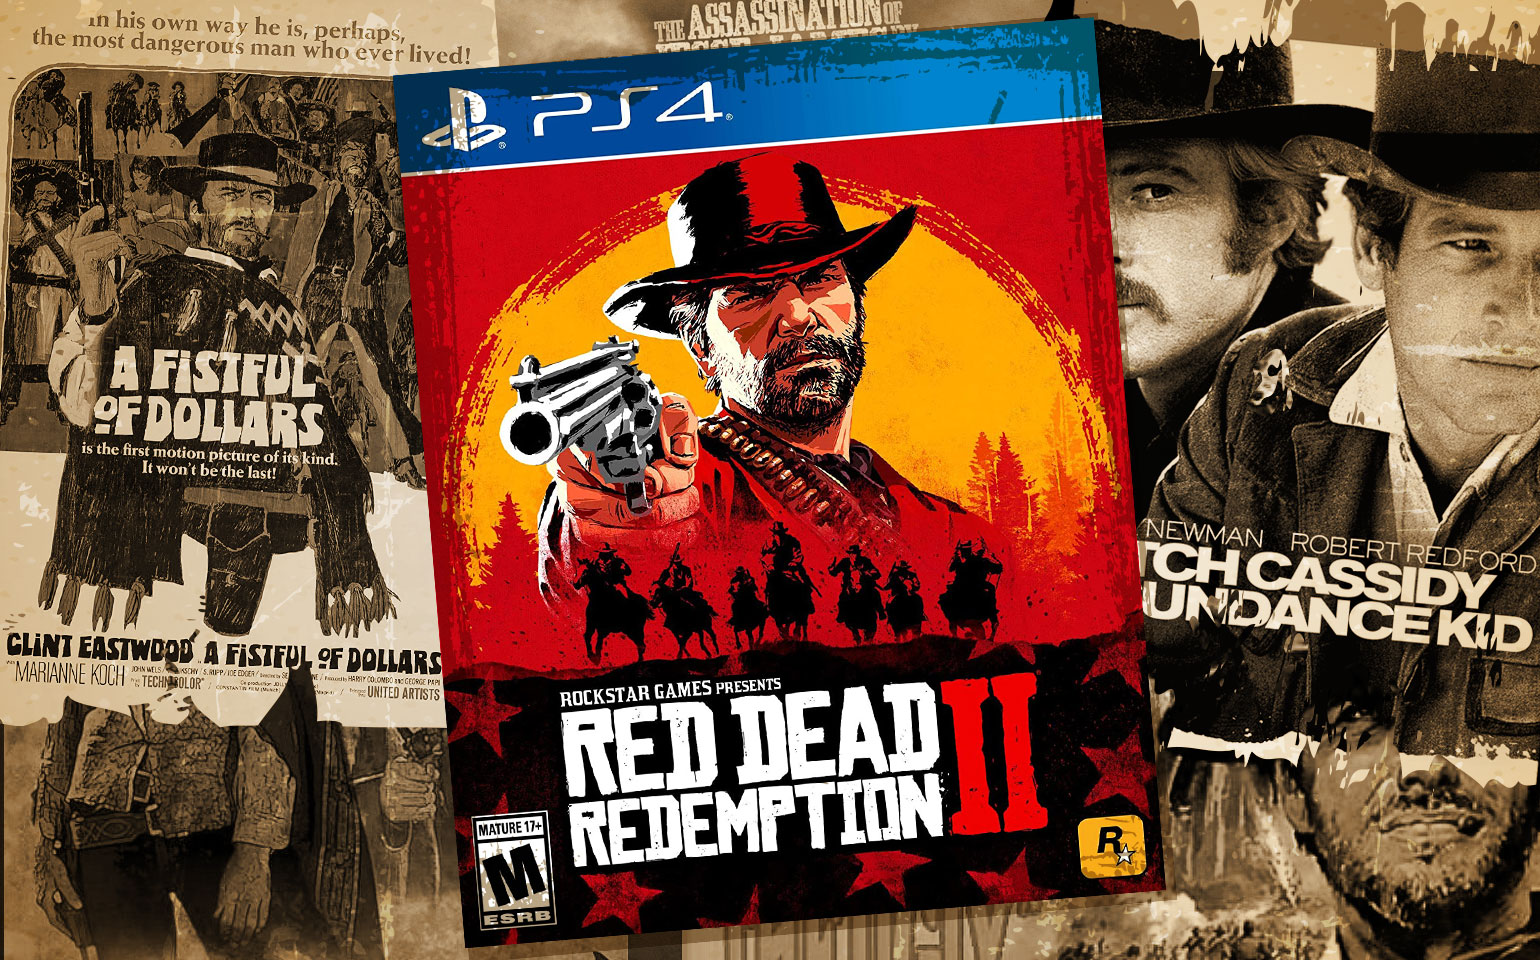 The cover of Red Dead Redemption 2 is shown against the background of western movies.